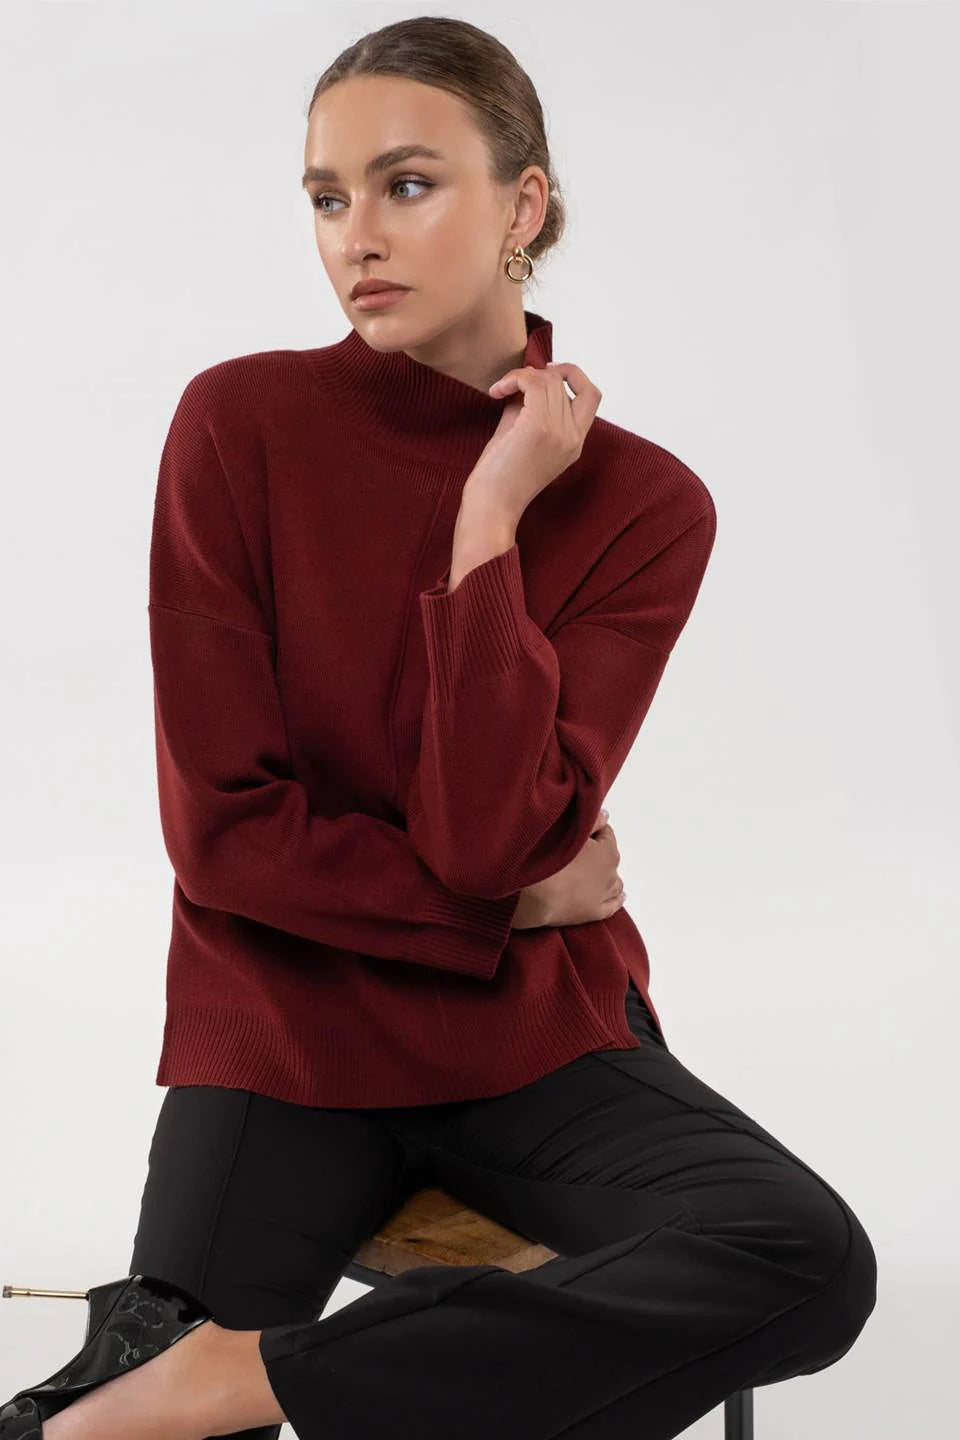 The Workshop by Blu Pepper Cowl Neck Tunic Knit Sweater